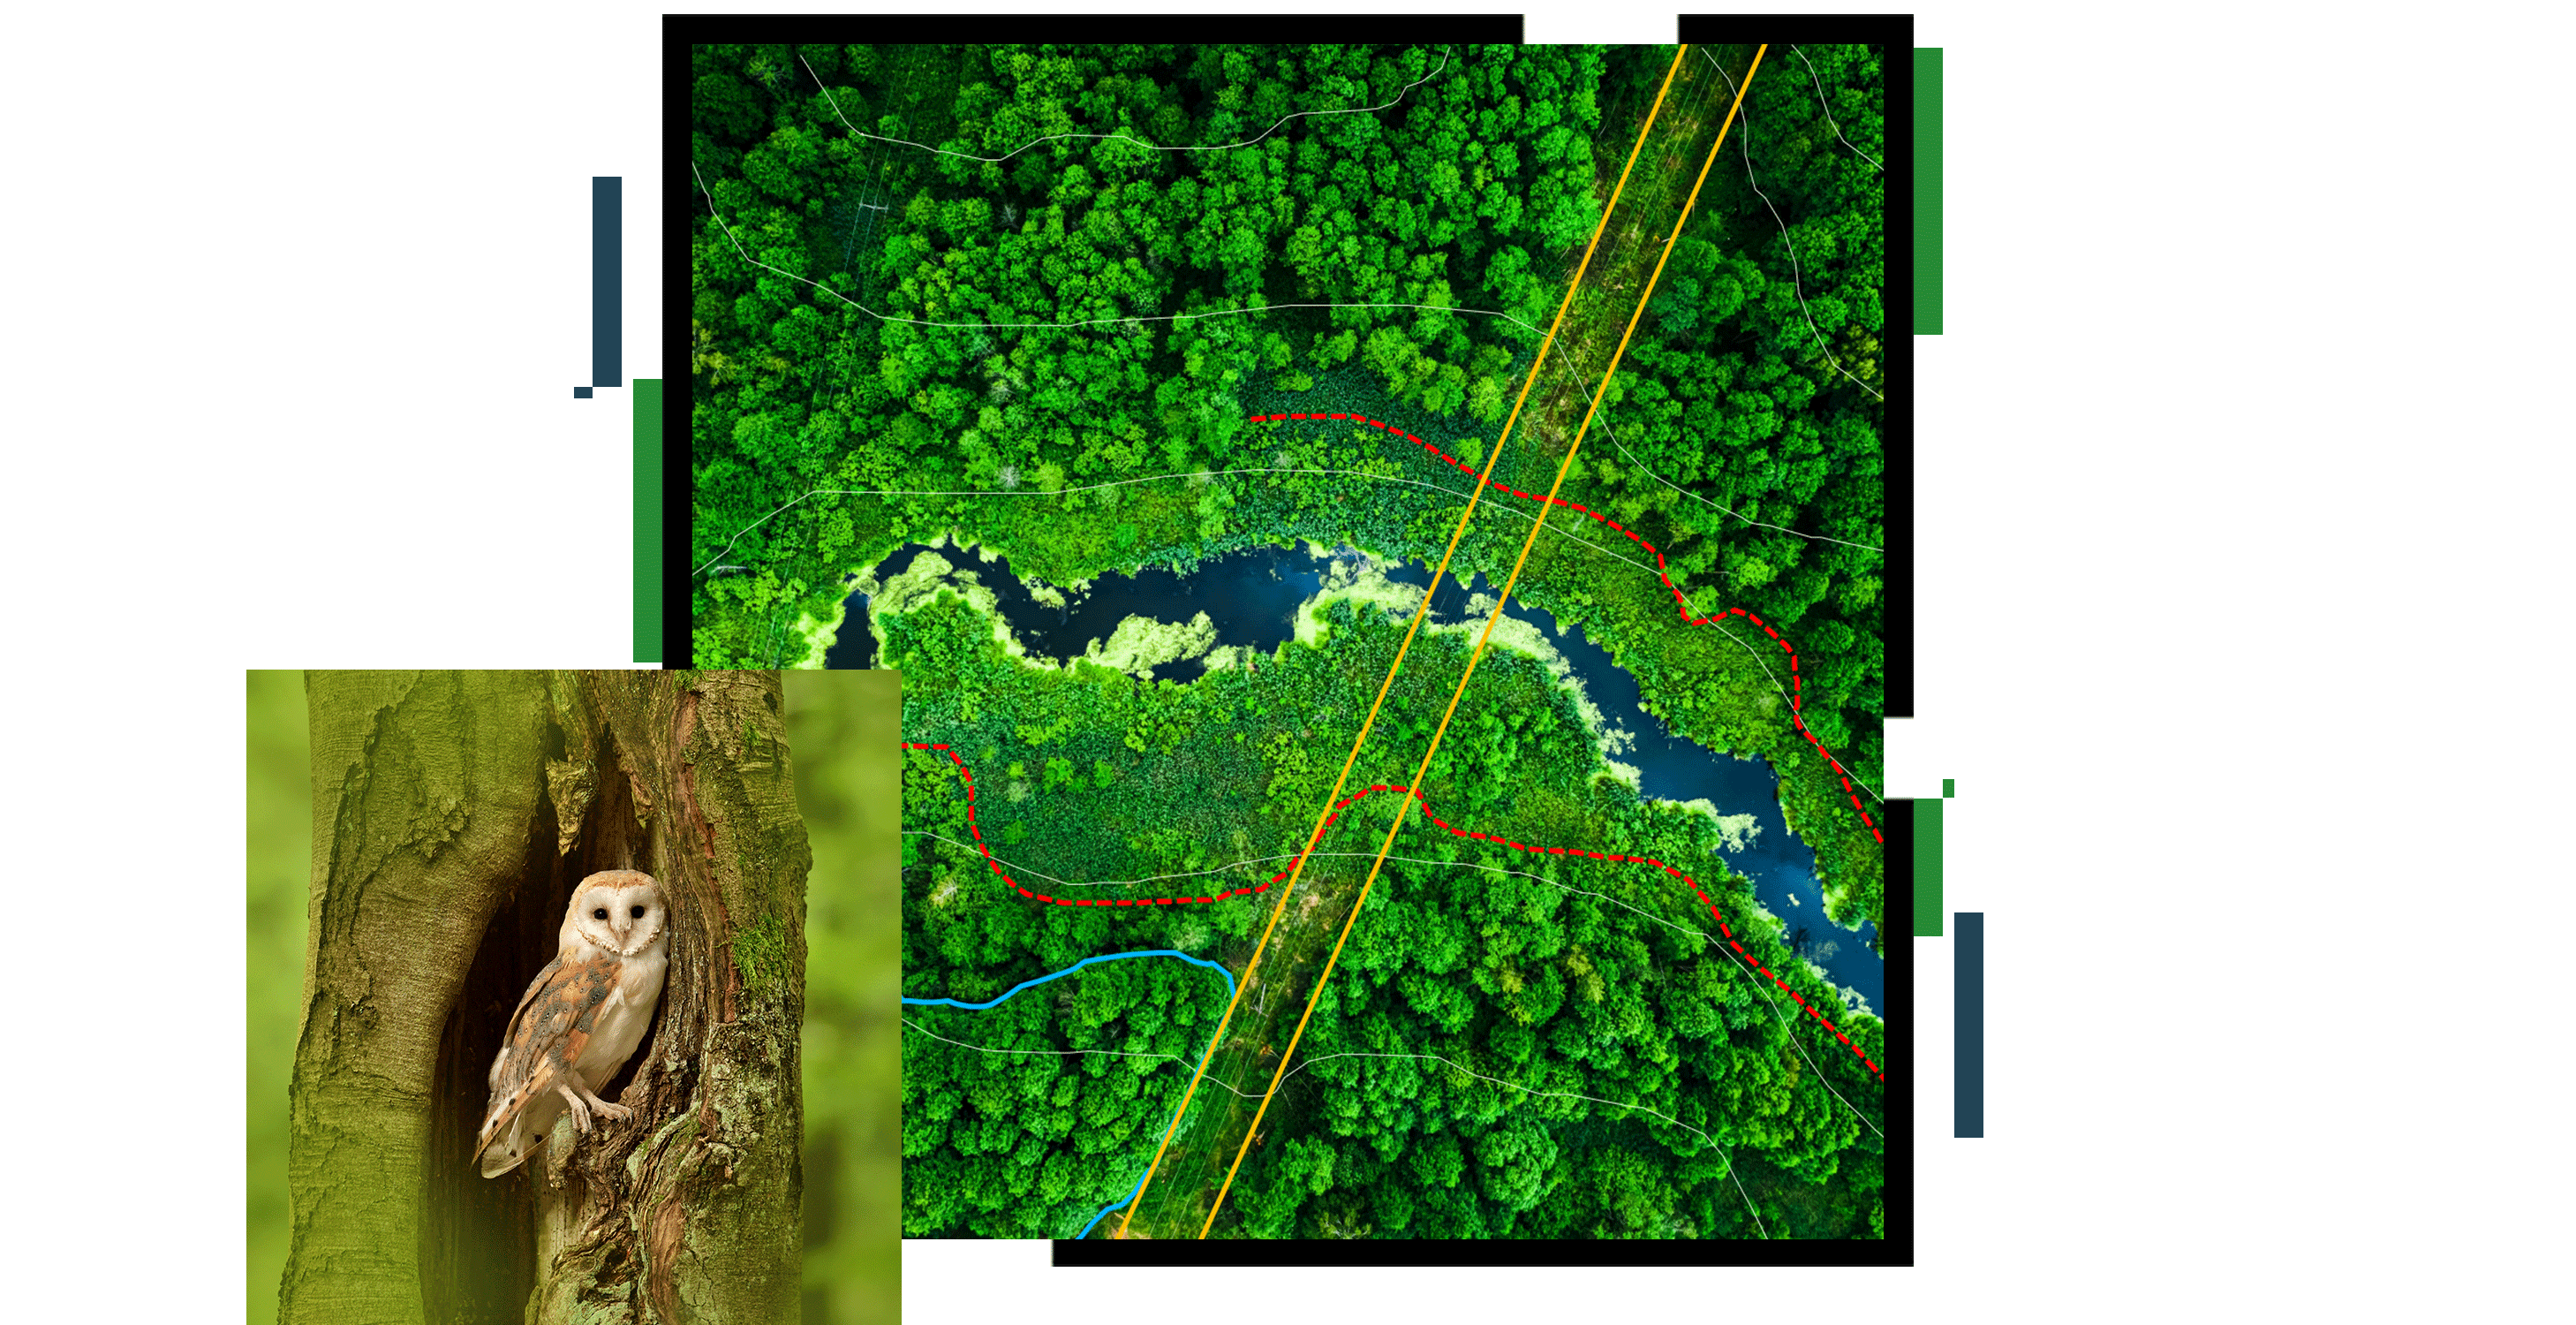 An aerial photo of a bright green forest with a blue river winding through it, overlaid with a photo of a brown and white barn owl perched in a hollowed tree trunk